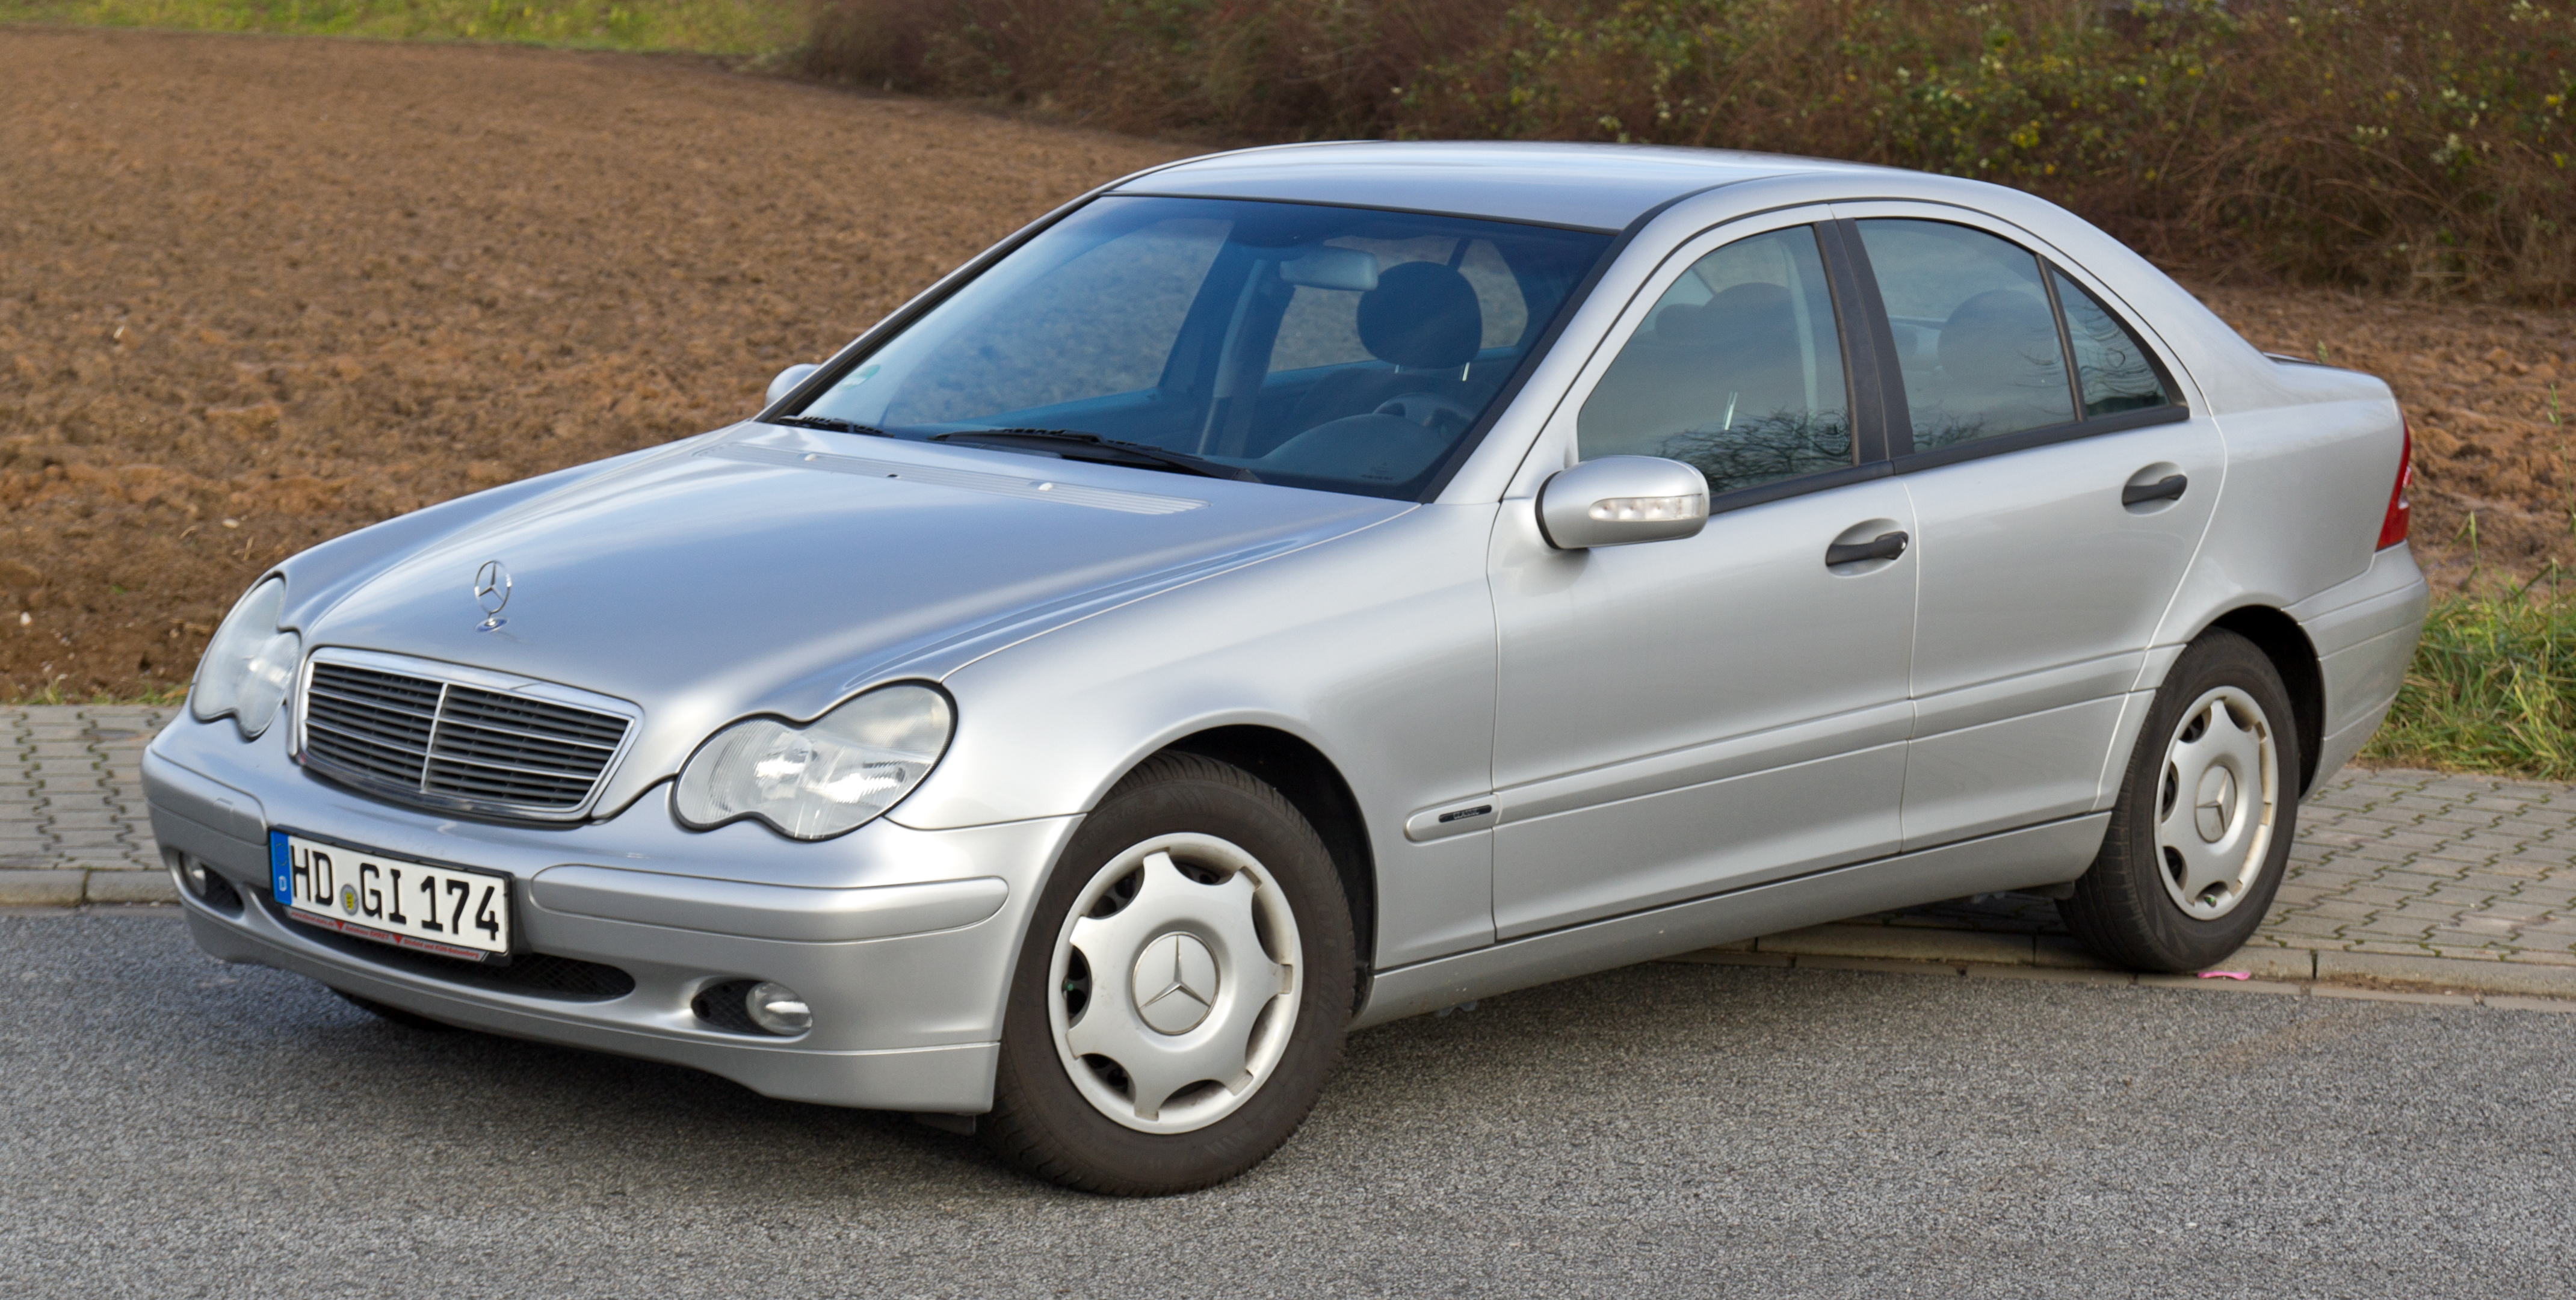 File:Mercedes-Benz W203 front 20171214.jpg - Wikimedia Commons